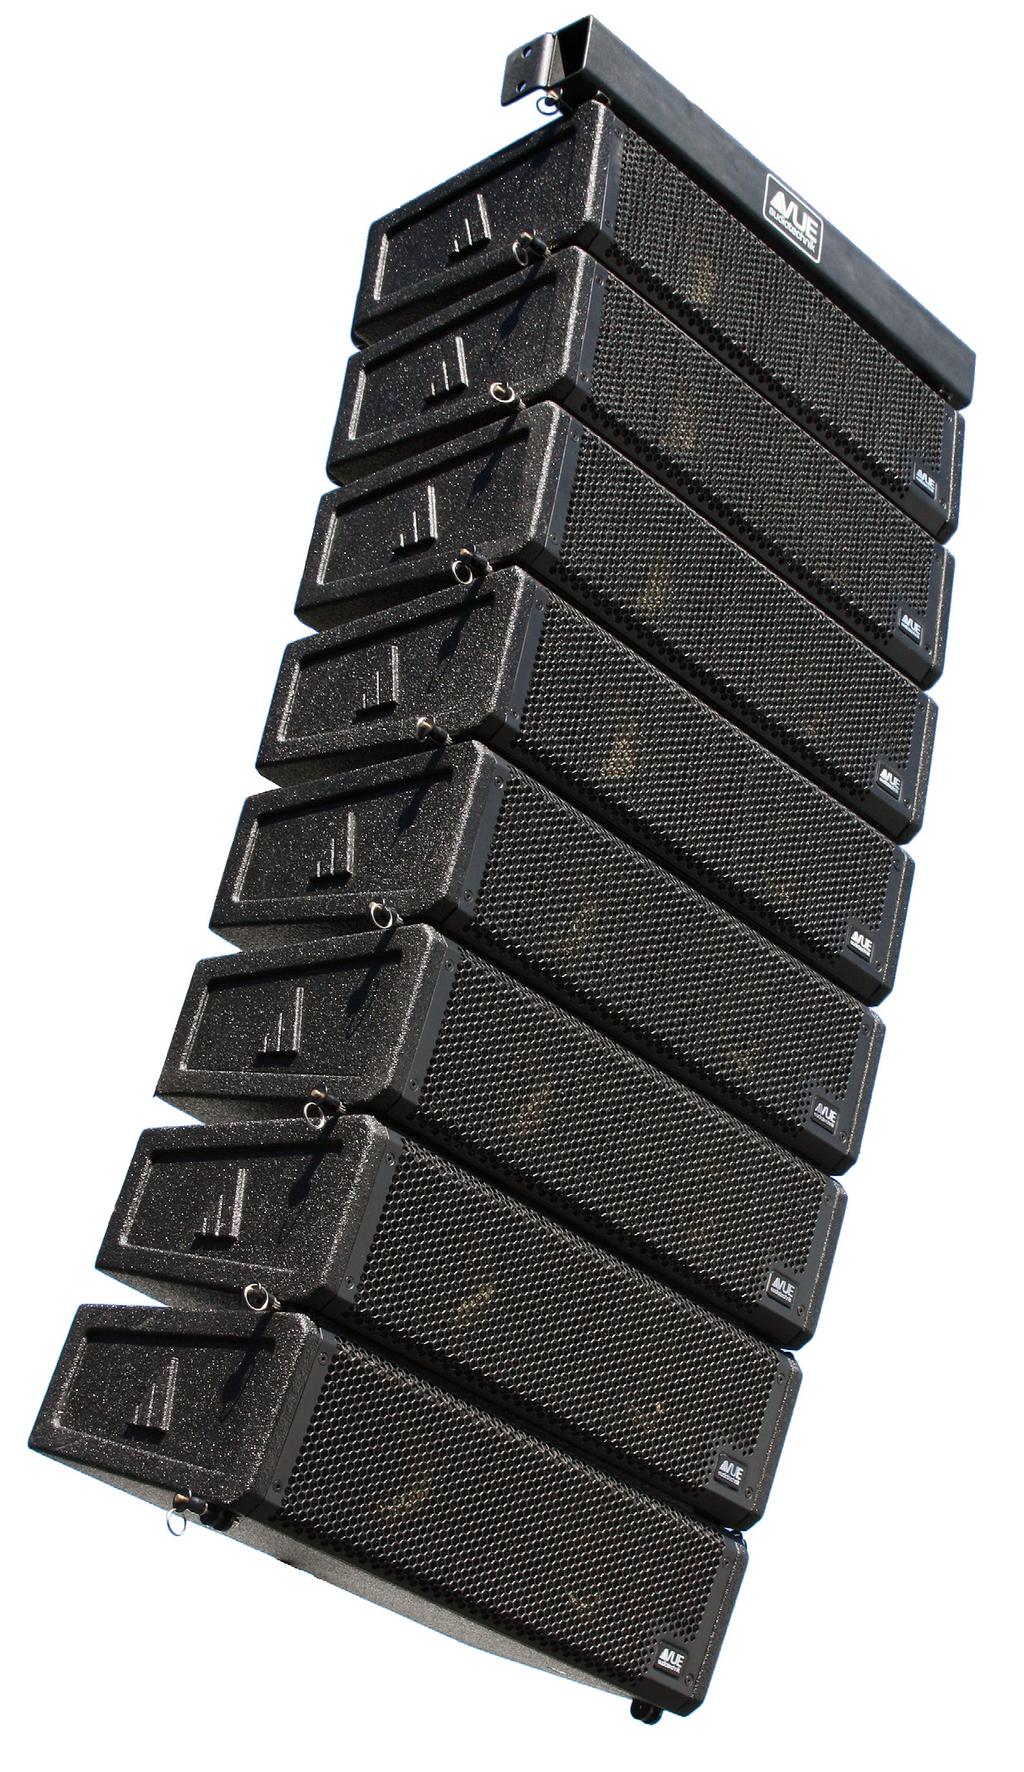 The al-4 Line Array System is made up of the al-4 Acoustic Element and the rack mount Systems Engine, which provides amplification, DSP and system control for up to 8 elements.